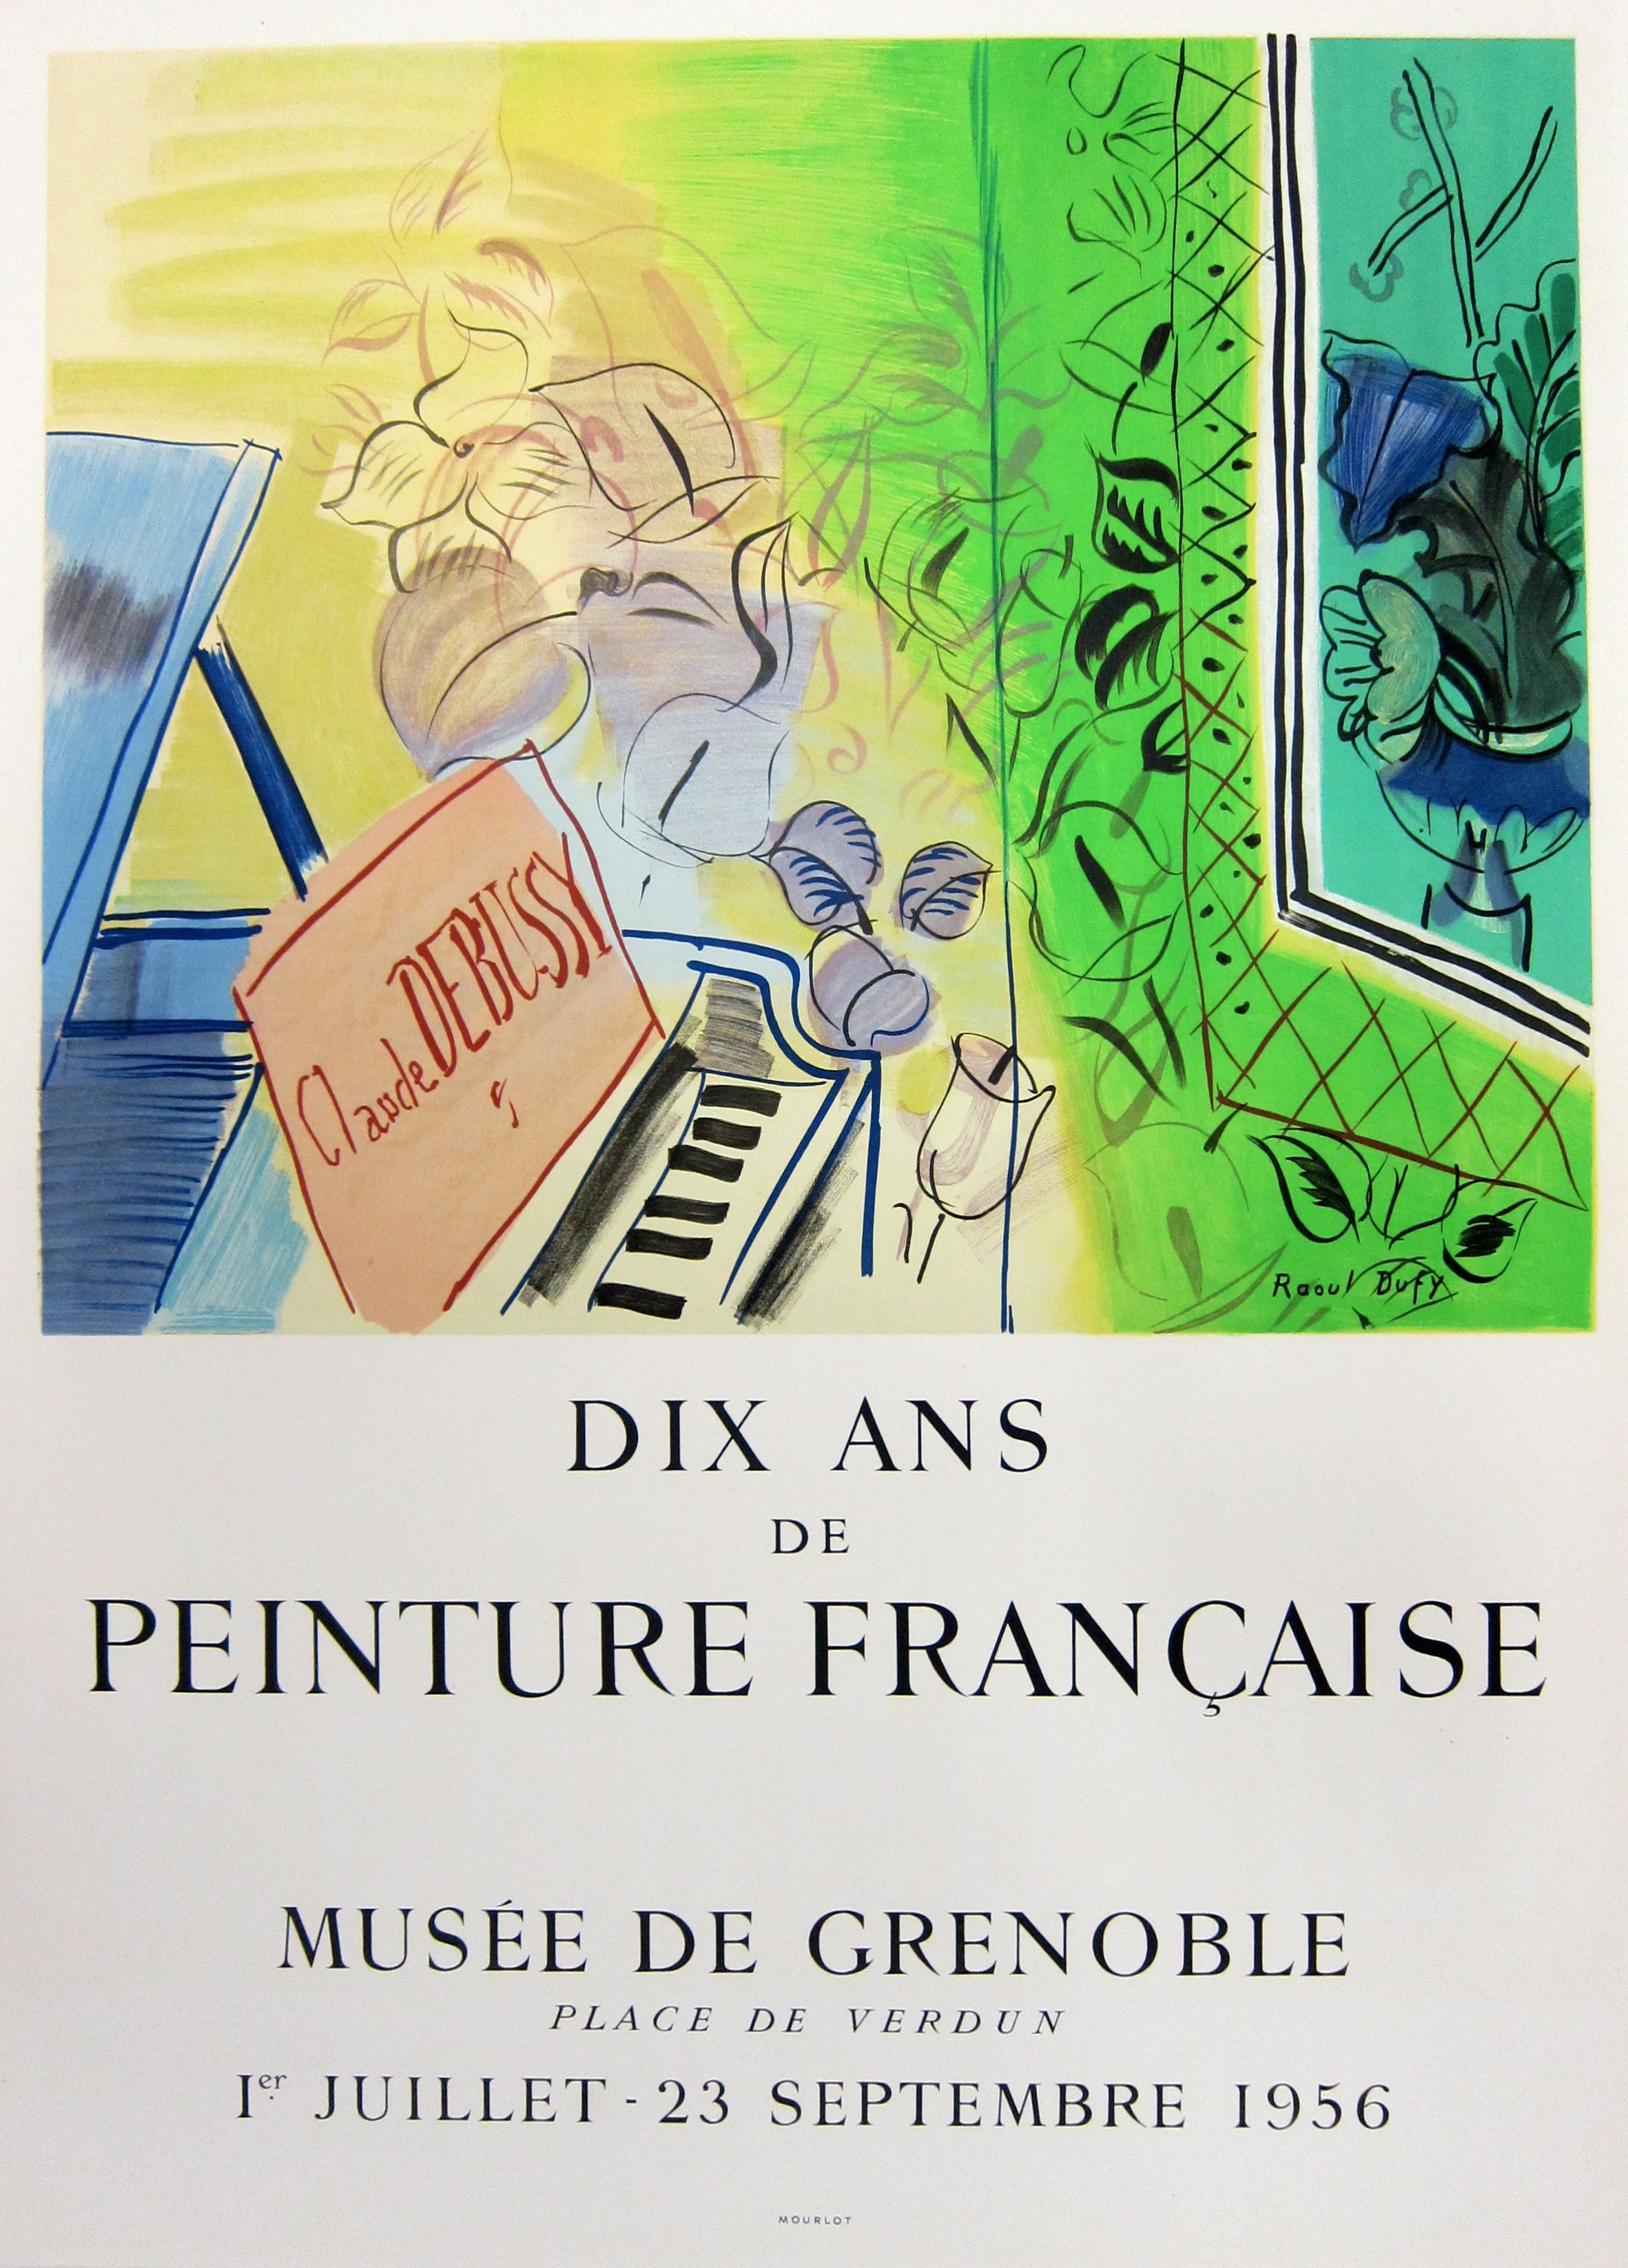 Homage an Claude Debussy - Institut Franais D'cosse (nach) Raoul Dufy, 1966